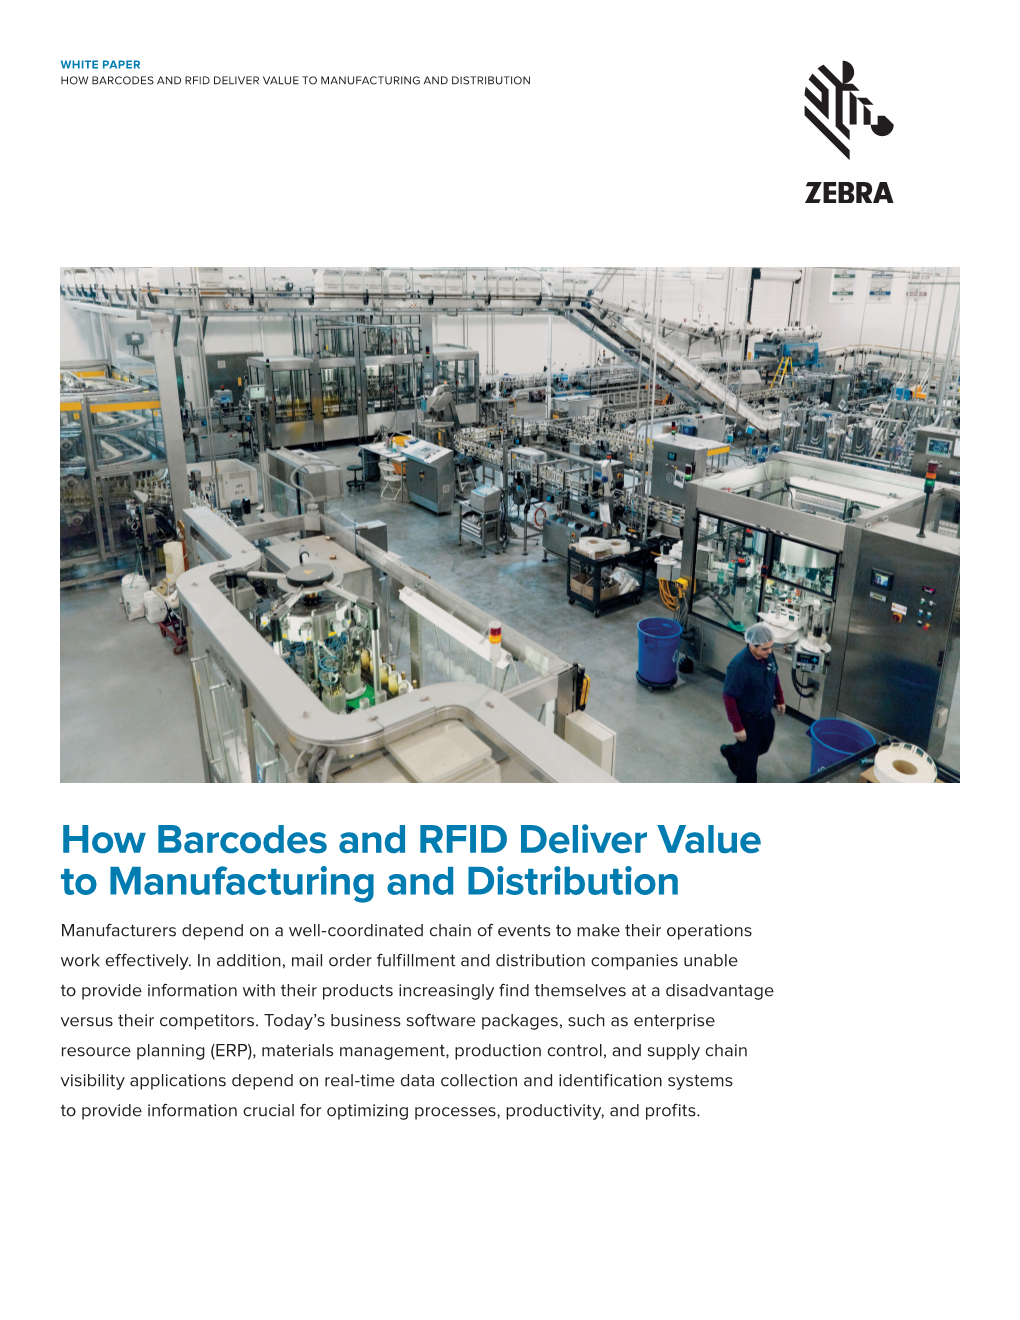 How Barcodes and Rfid Deliver Value to Manufacturing and Distribution